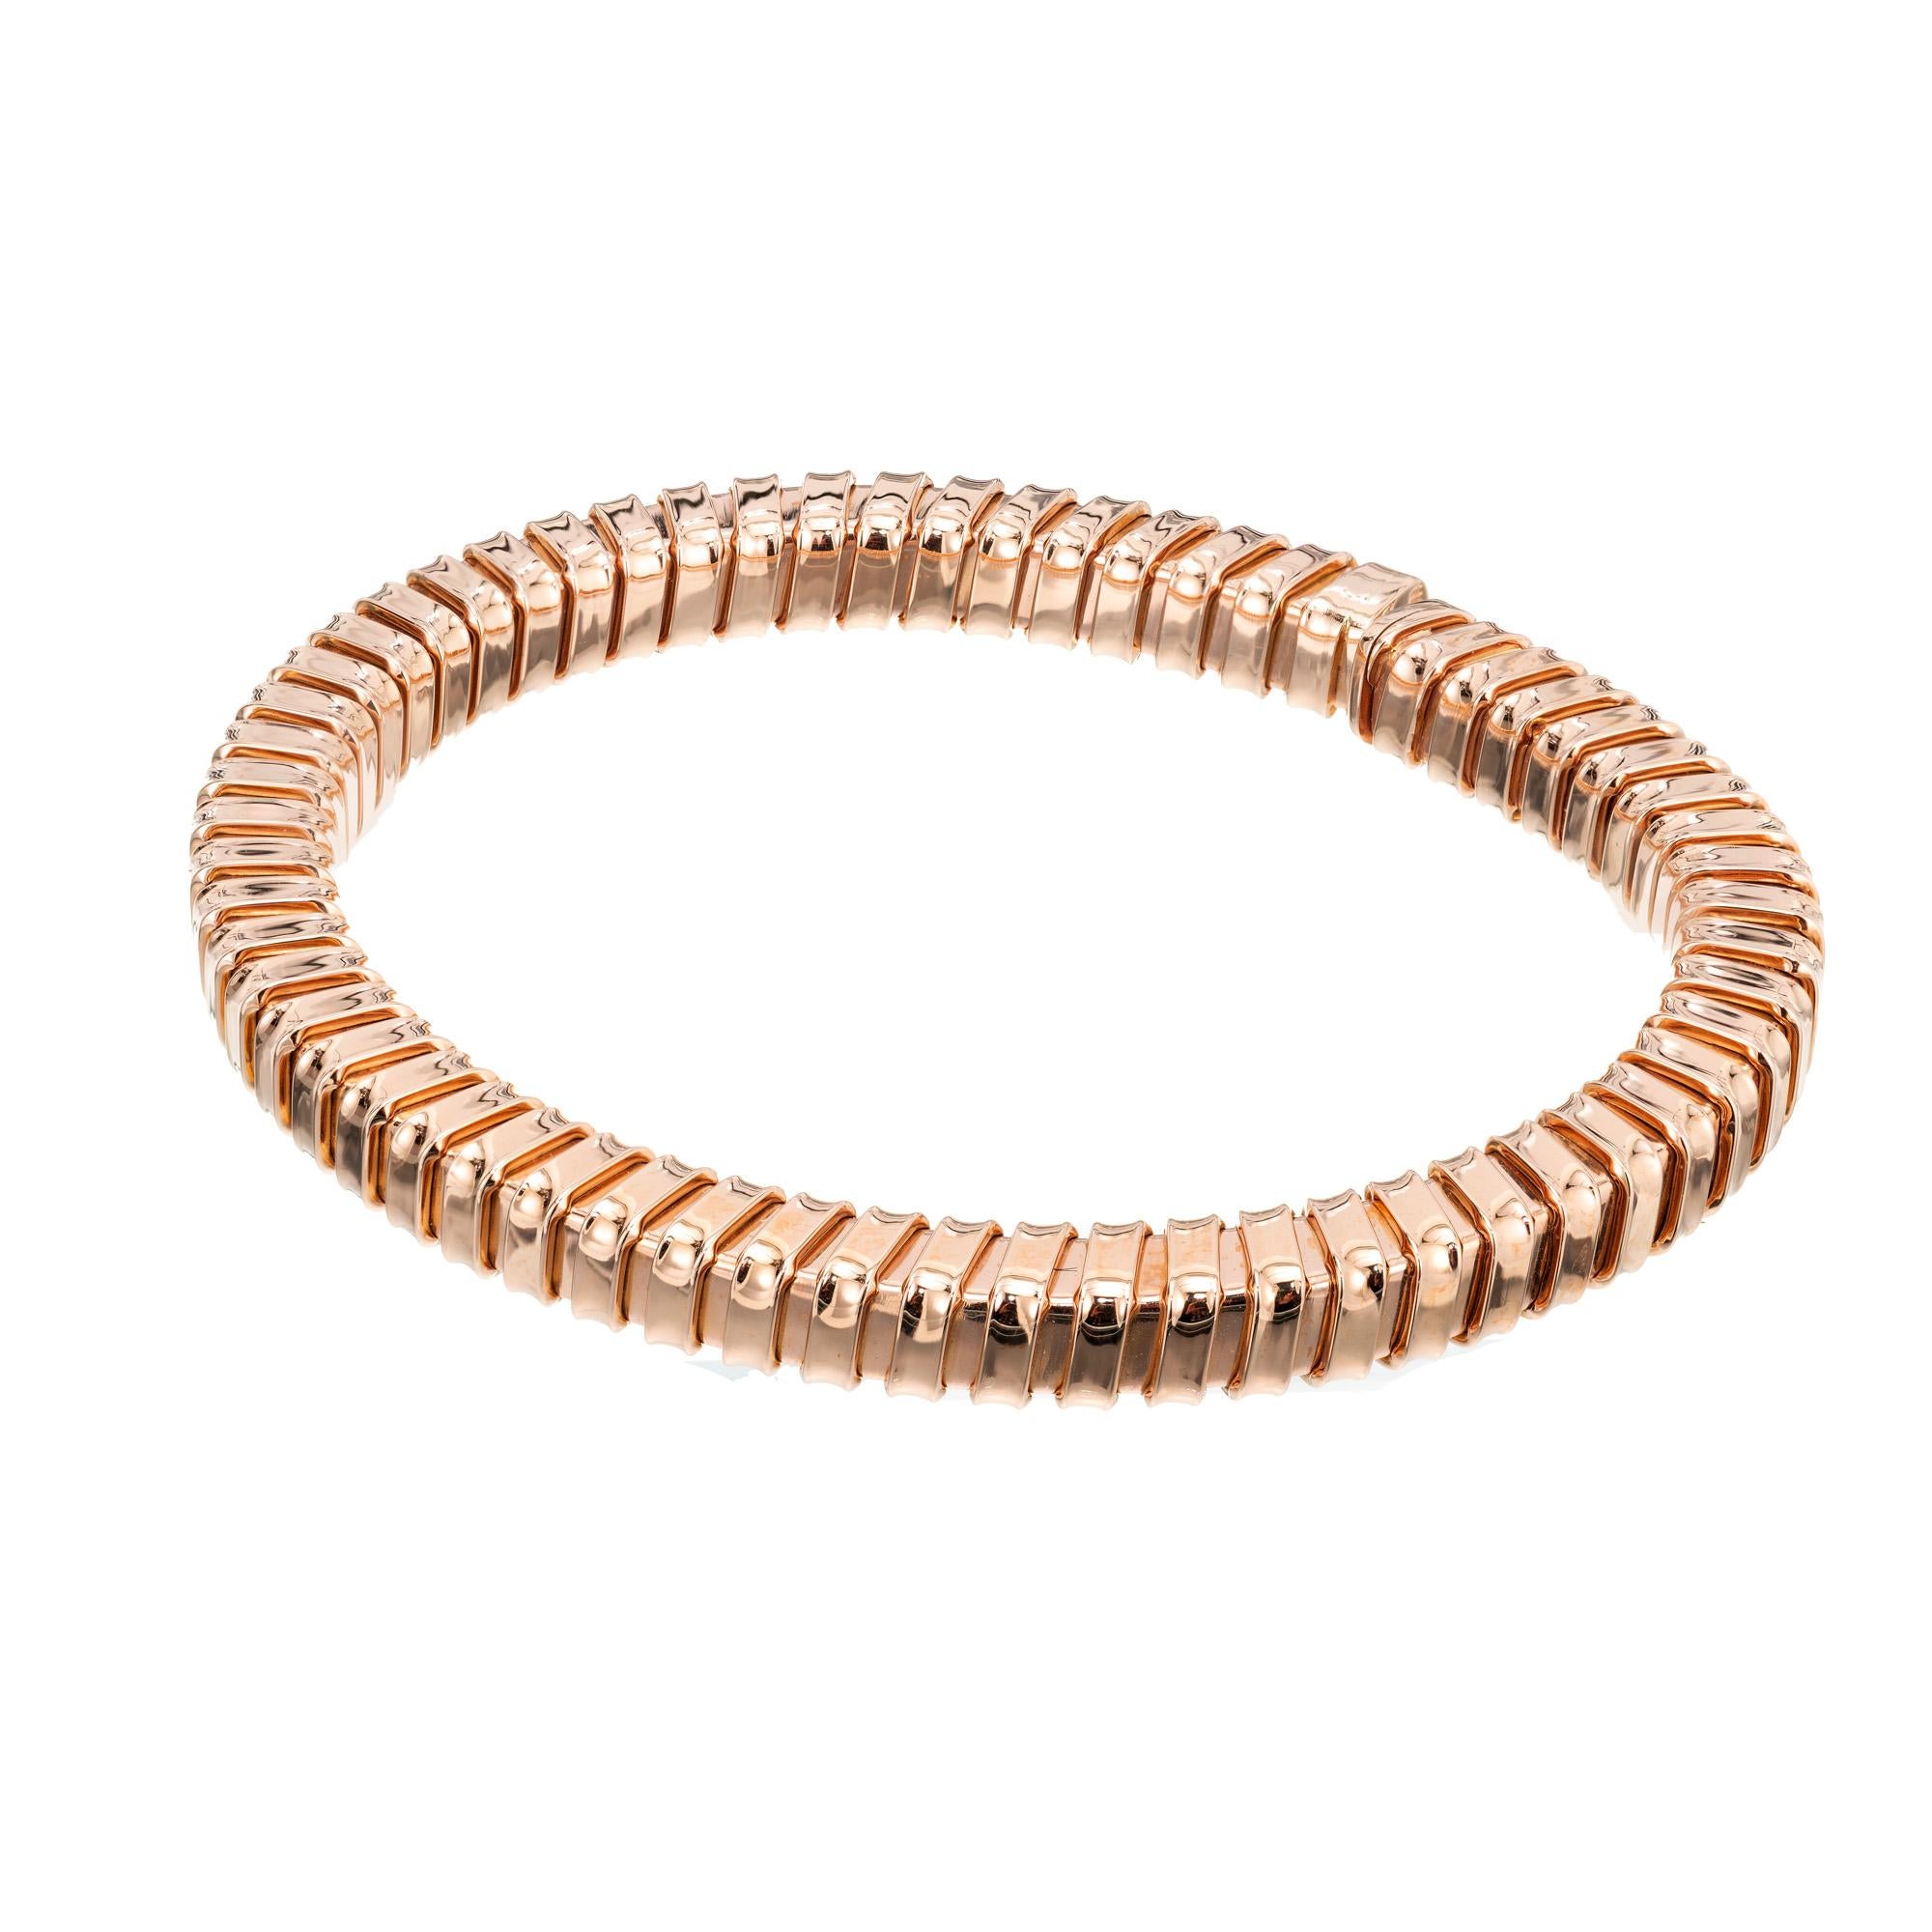 Carlo Weingrill Tubogas cuff bracelet. Crafted in high polished 18k rose gold in a segmented tube design. Semi flexible cuff style. 7 inch. Weingrill hallmark

18k rose gold
Stamped: 750
Hallmark: Weingrill
21.4 grams
Width: